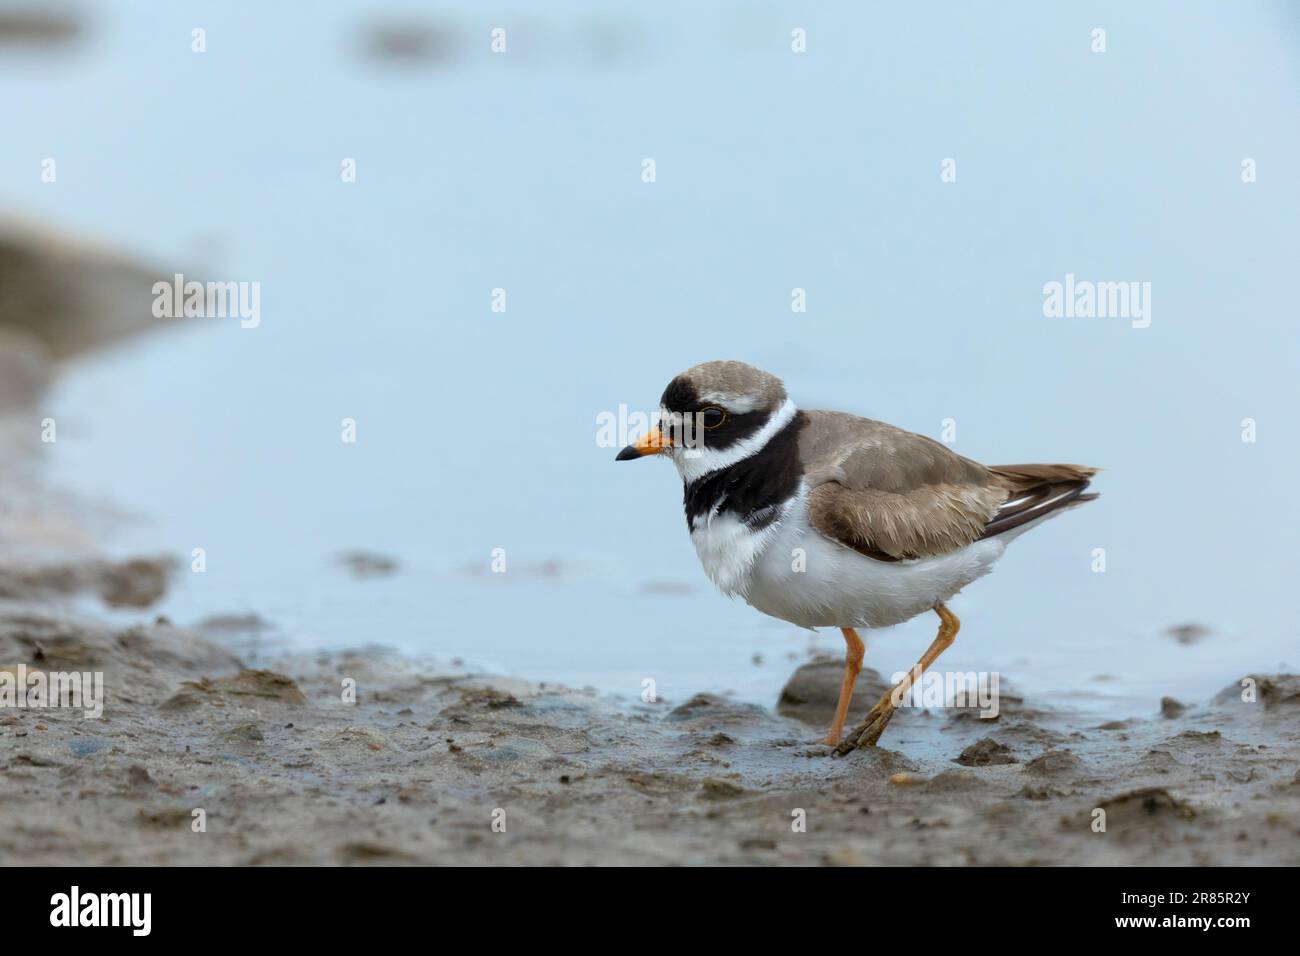 Ringed plover by a bathing pool Stock Photo